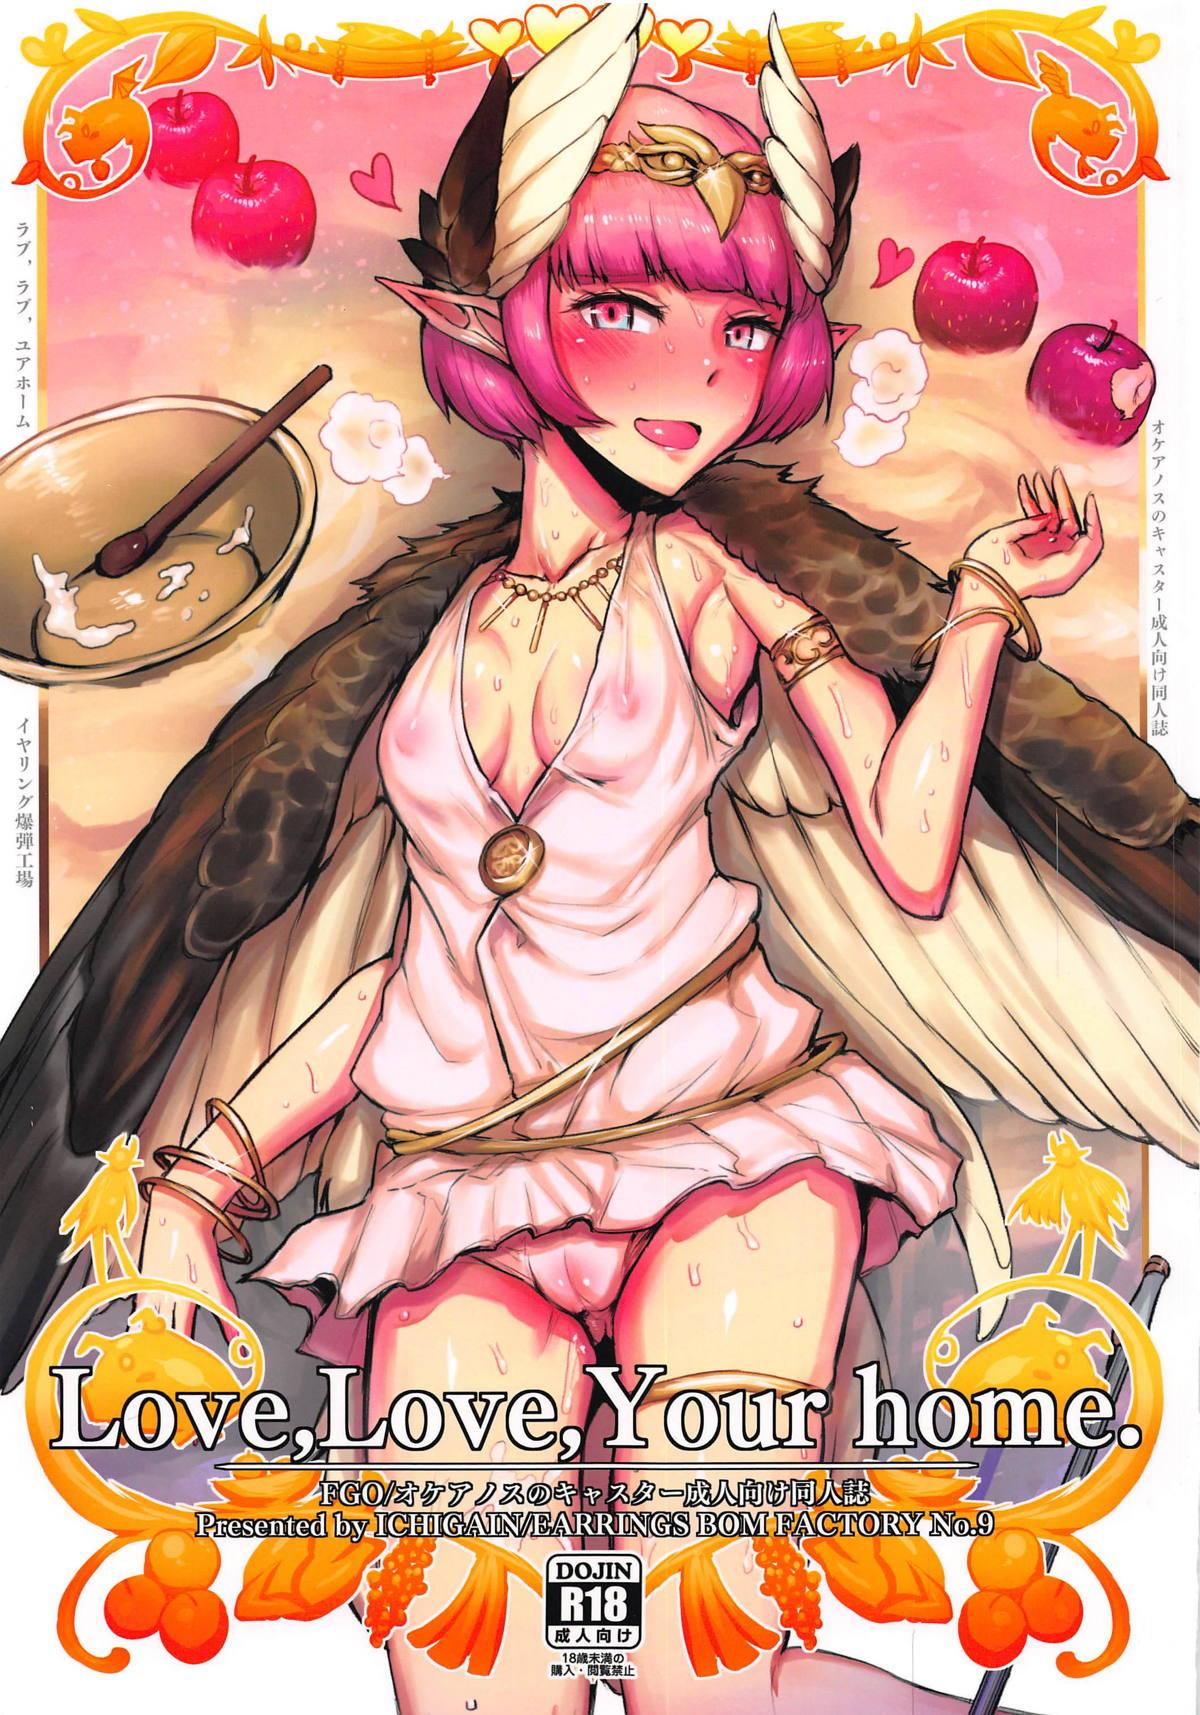 Orgasmo Love, Love, Your home. - Fate grand order Anime - Picture 1